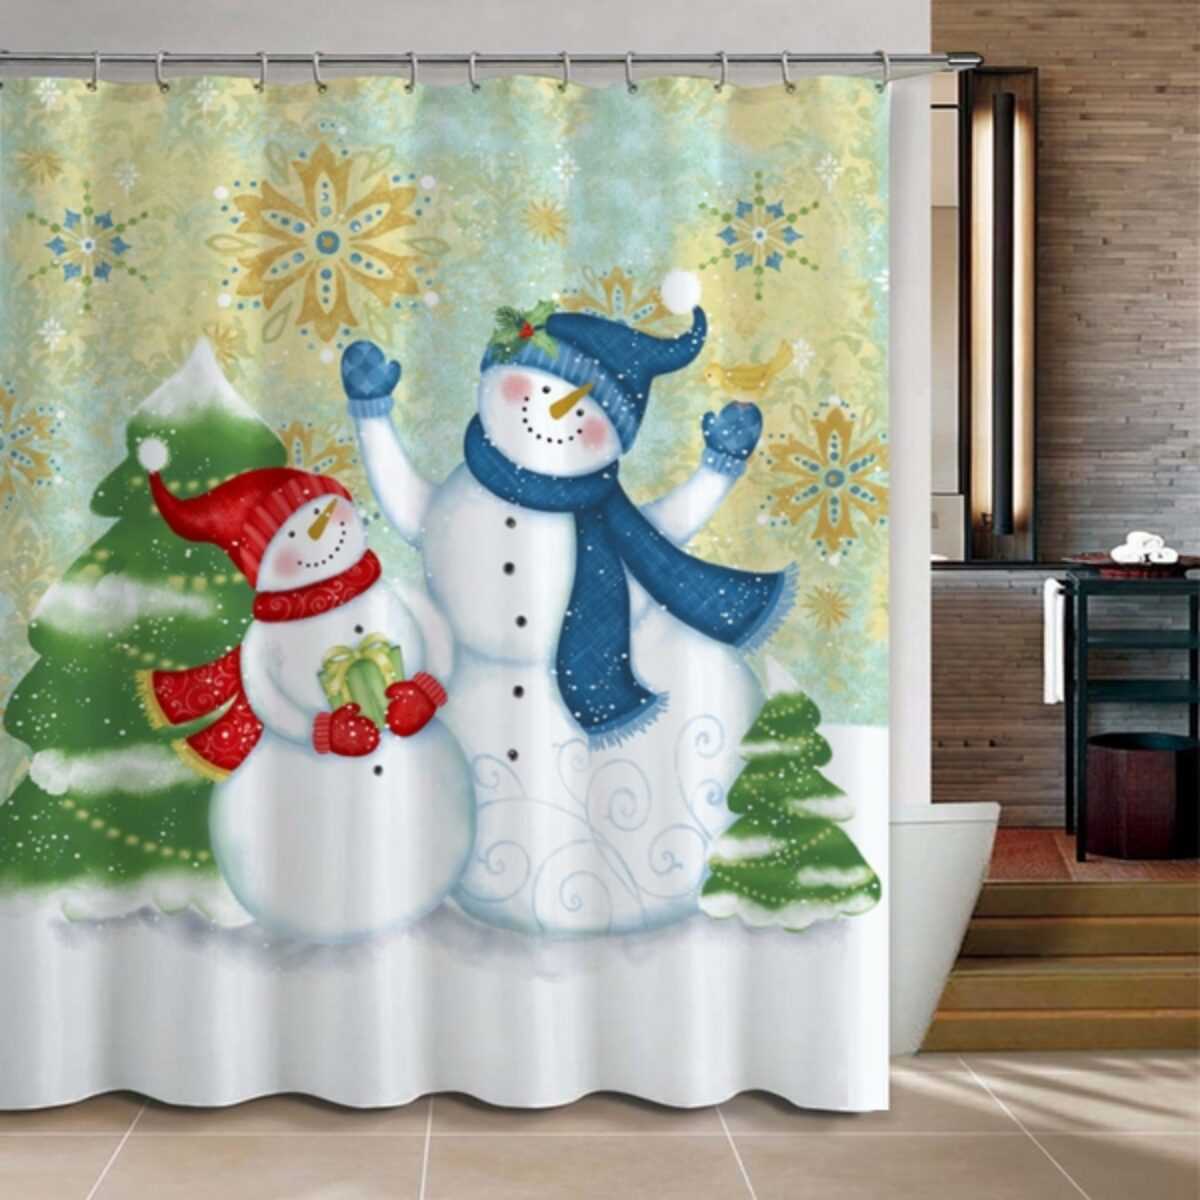 20 Shower Curtains, Snow Time Country Snowman Shower Curtain